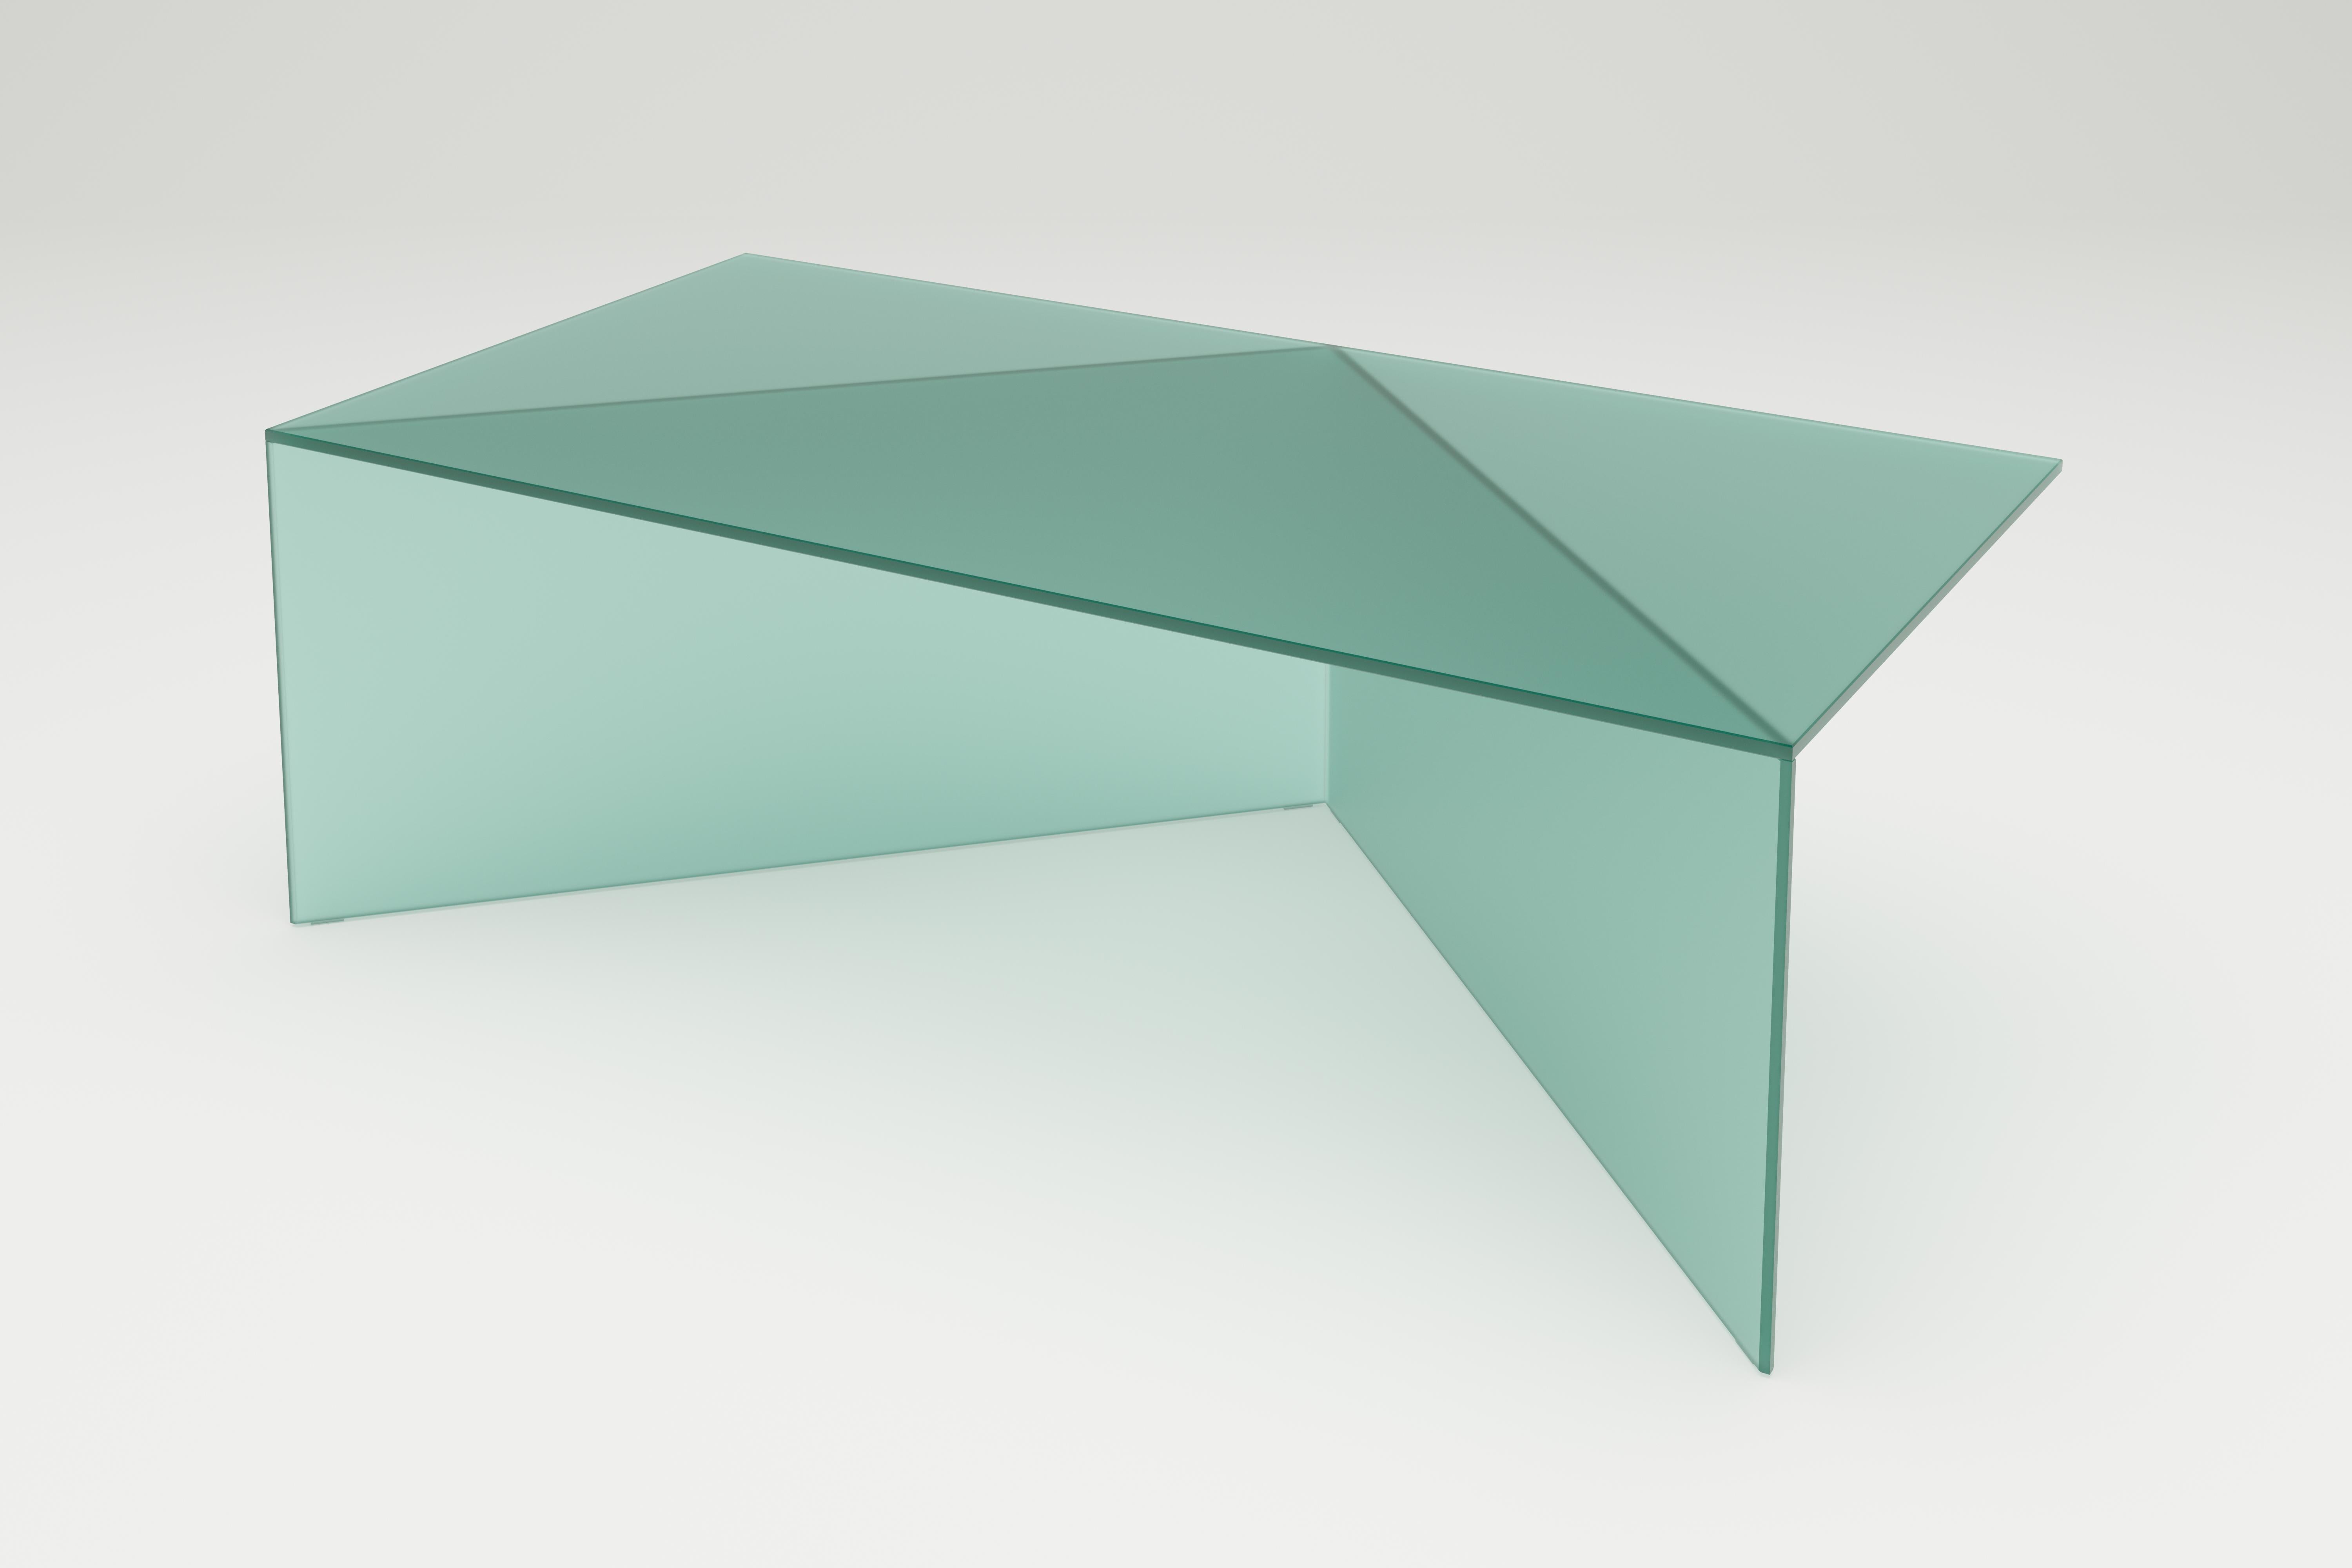 Green Satin glass Poly Square coffe table by Sebastian Scherer
Dimensions: D120 x W30 x H40 cm
Materials: Solid coloured glass.
Weight: 34.4 kg.
Also Available: Colours:Clear white (transparent) / clear green / clear blue / clear bronze / clear